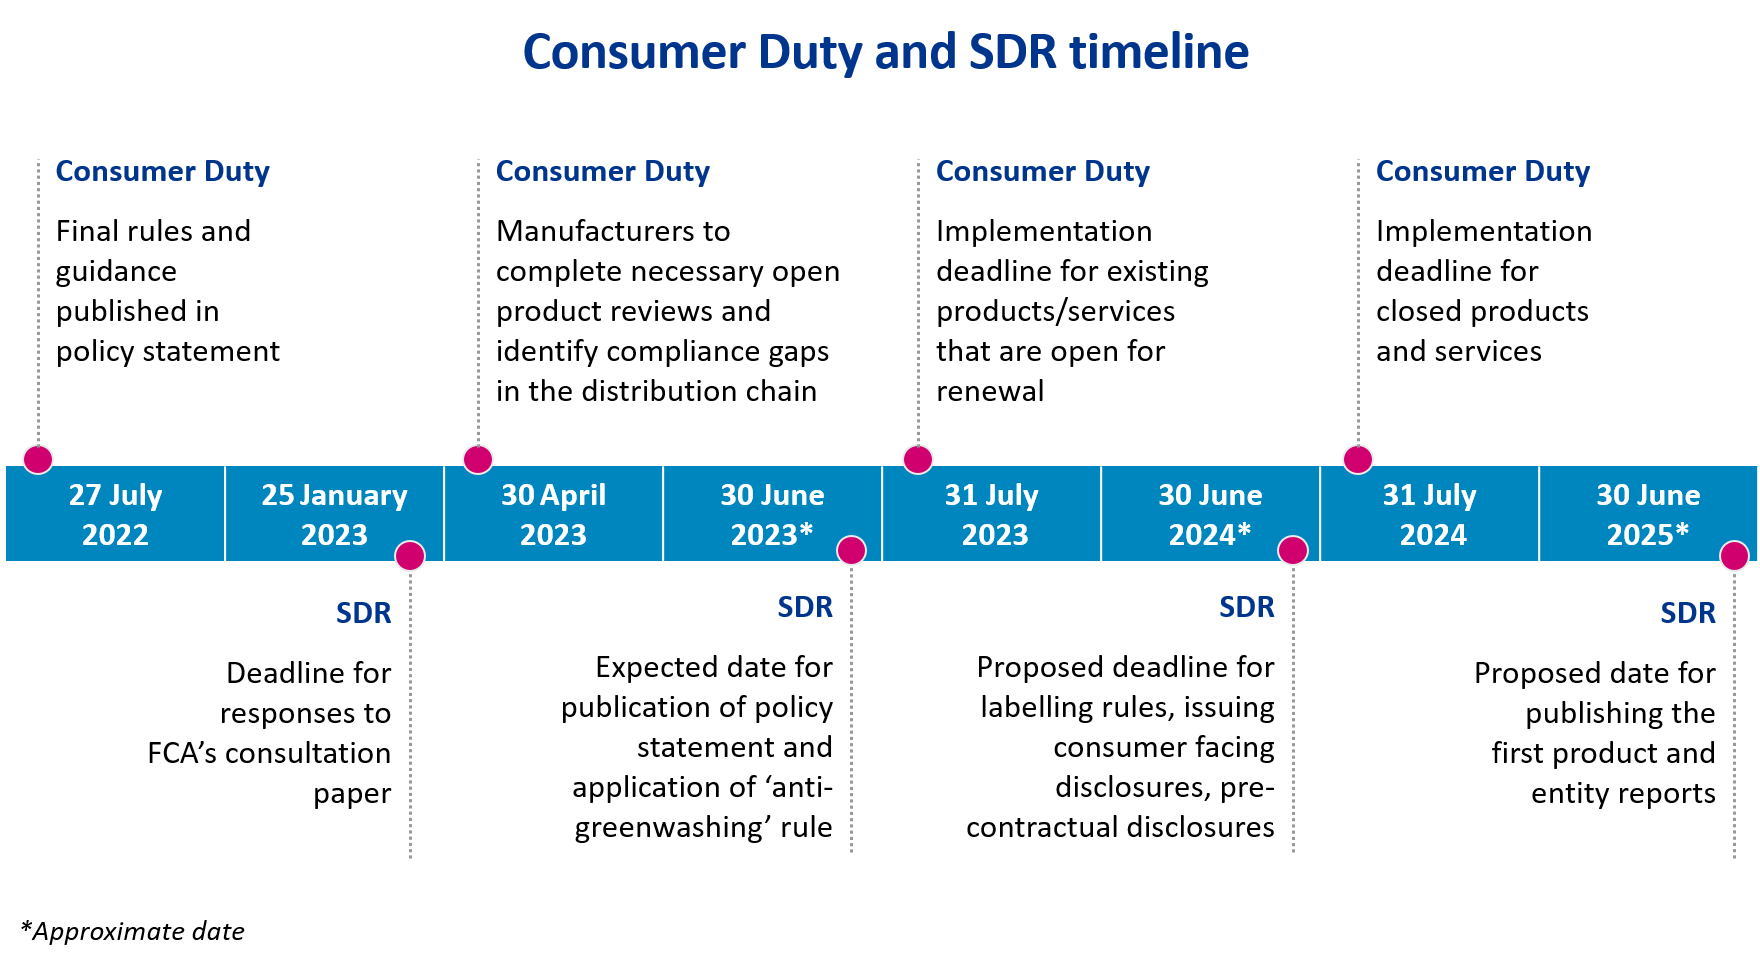 Consumer Duty and SDR timeline